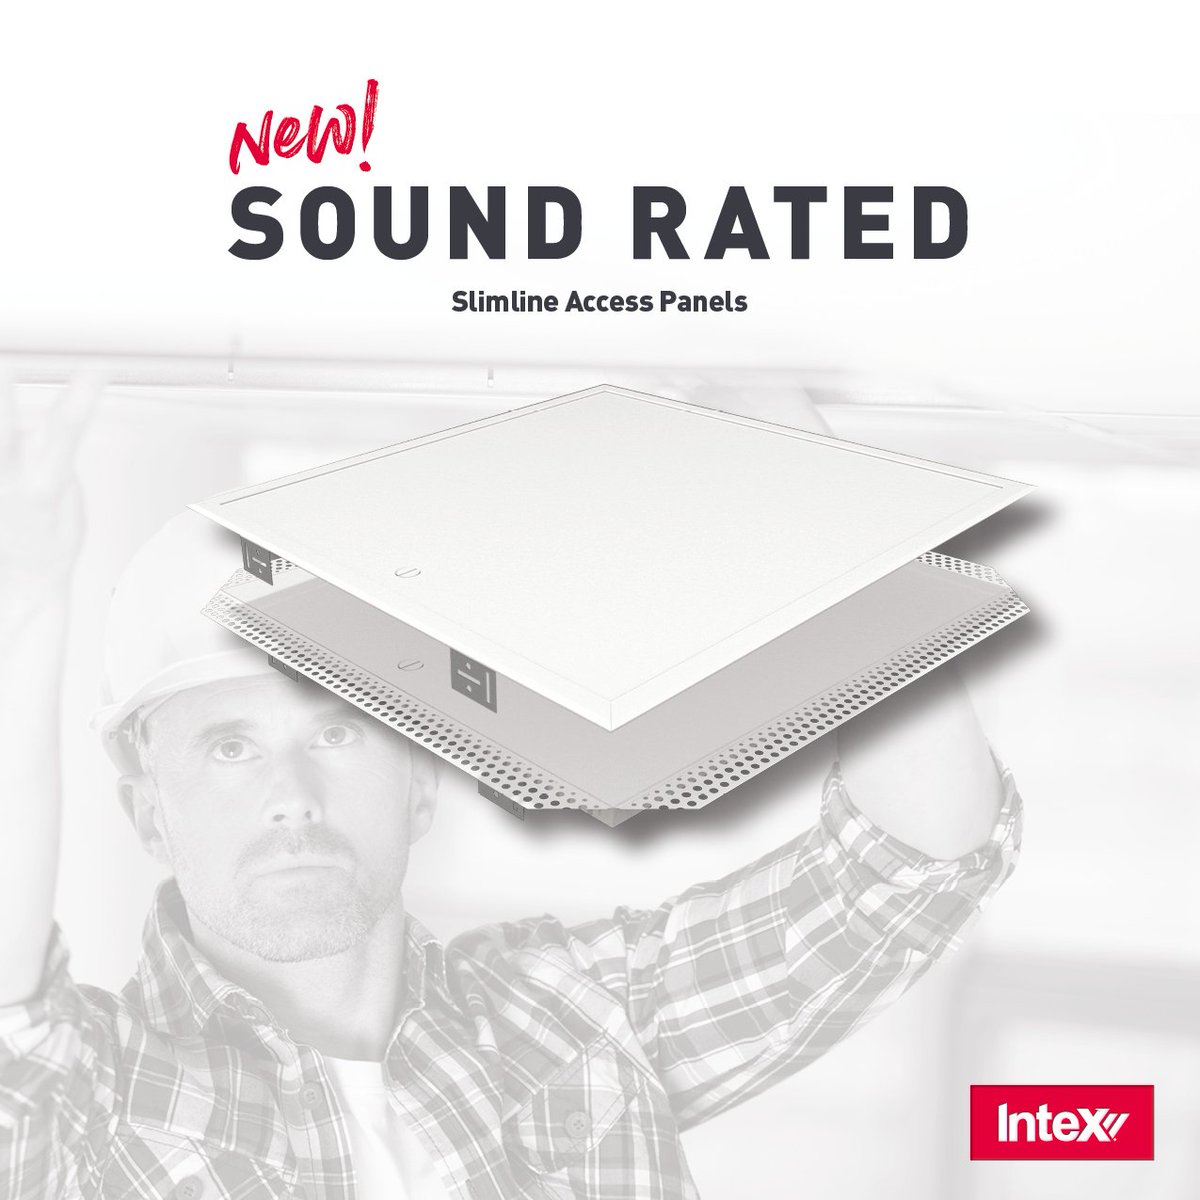 New Product Alert!

Intex has incorporated a full series of Sound Rated
Access Panels, certified to BSENIS0140-3:1995 and built to comply with all Australian building codes.

Ask your local retailer!

#soundrated #acoustic #ceilingsystems #wallsystems #accesspanels